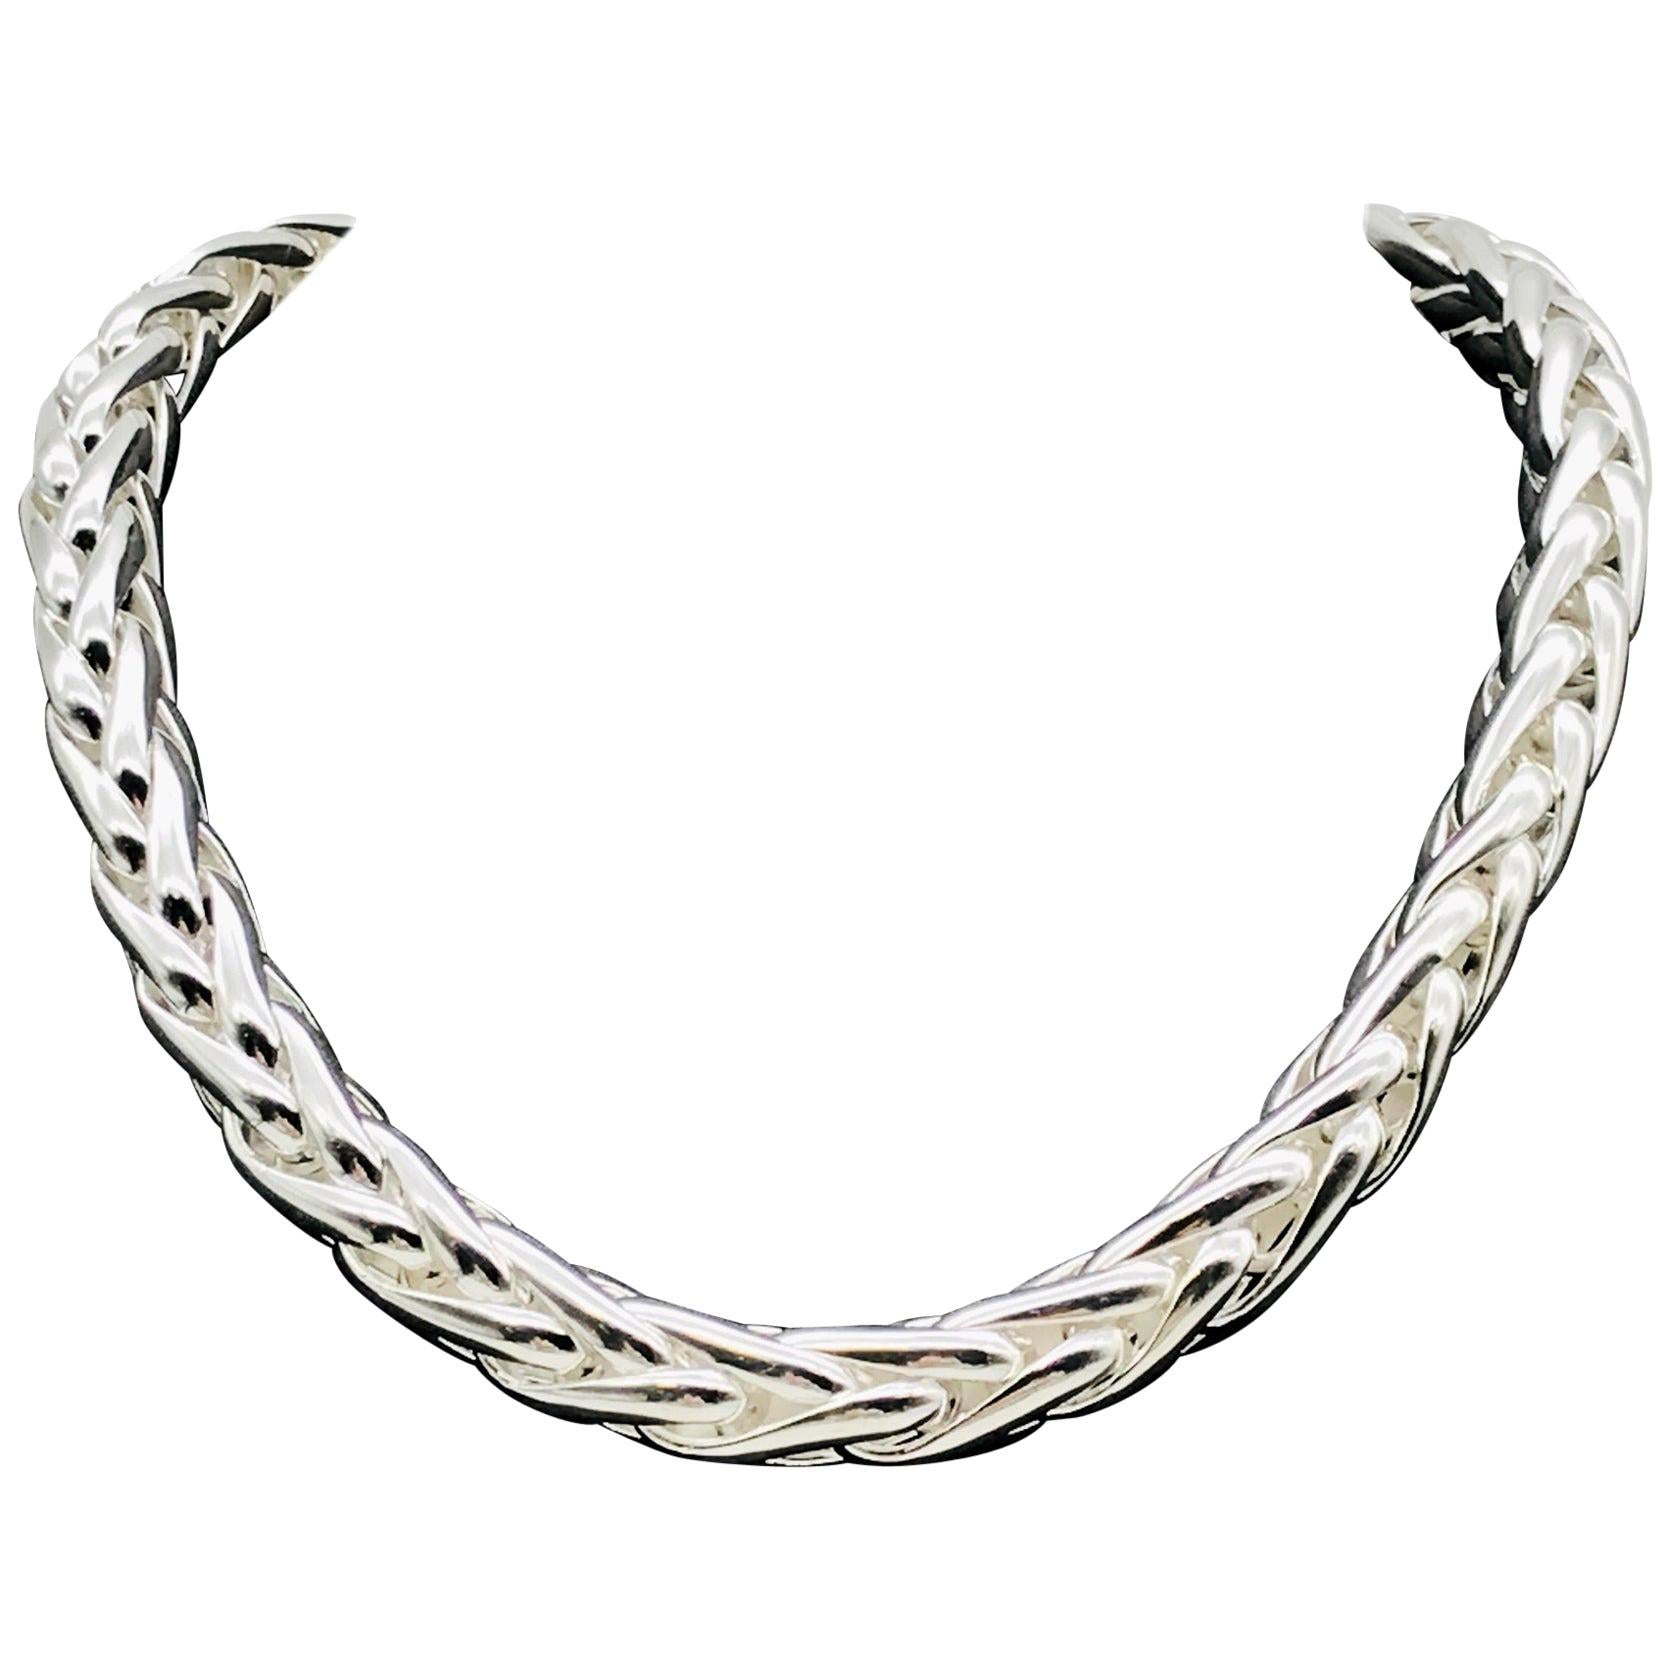 Braided Mesh Silver Necklace